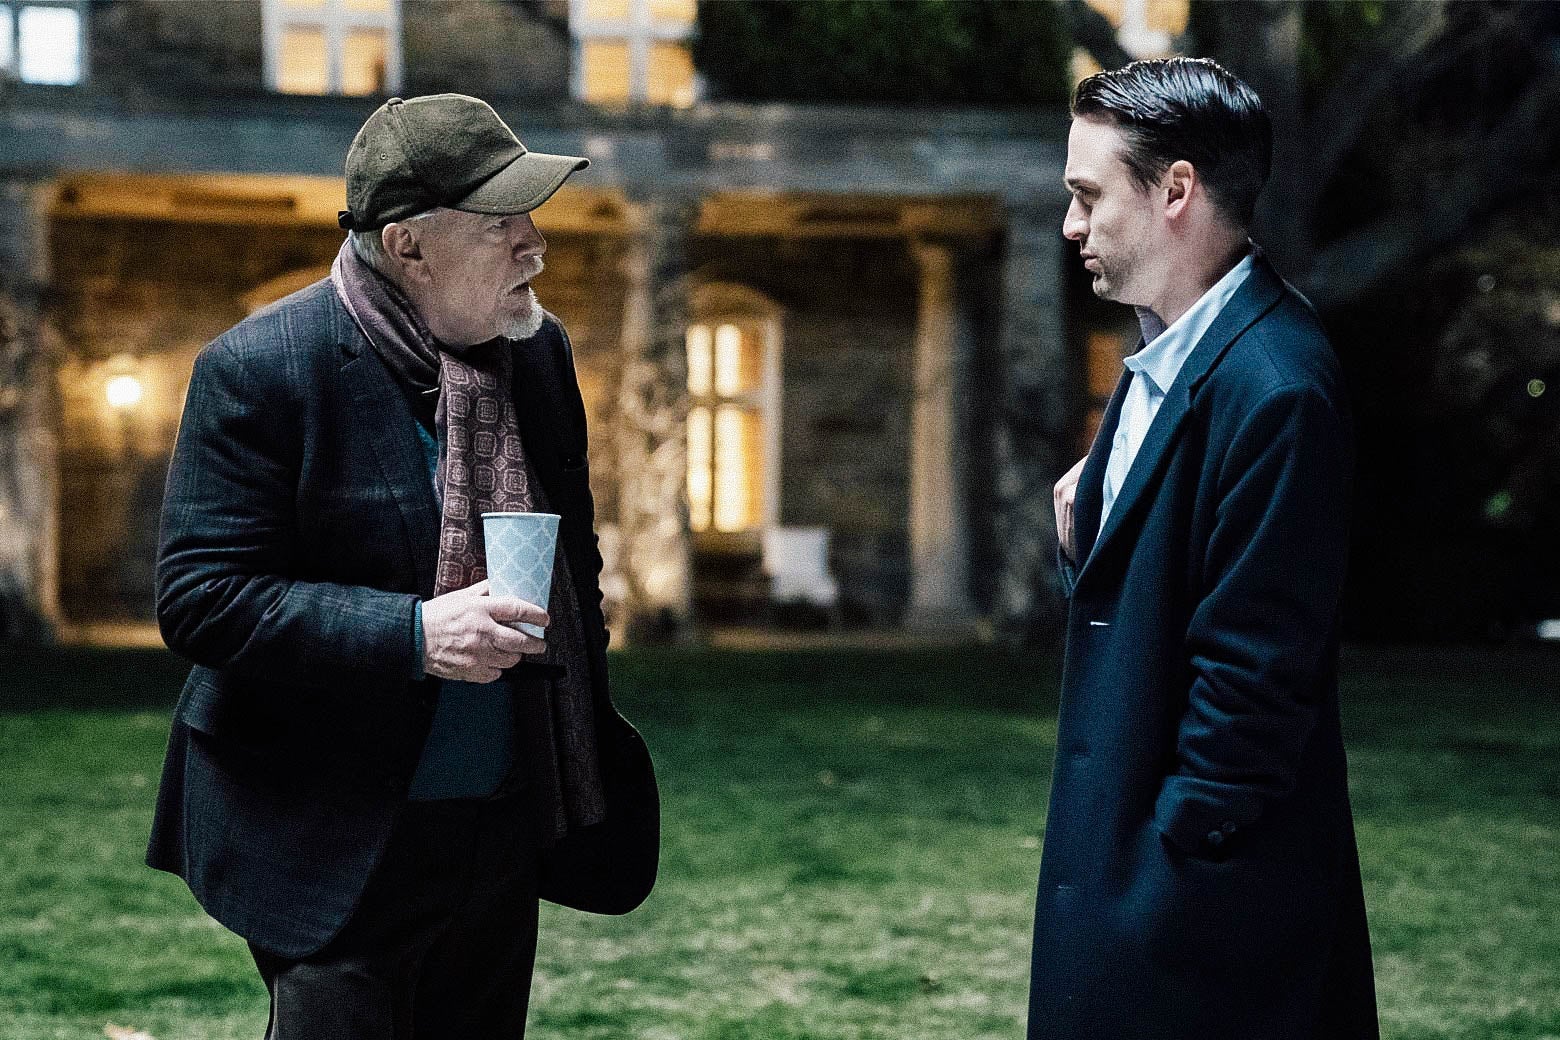 Brian Cox and Kieran Culkin stand on a lawn outside a big house in a still from Succession.